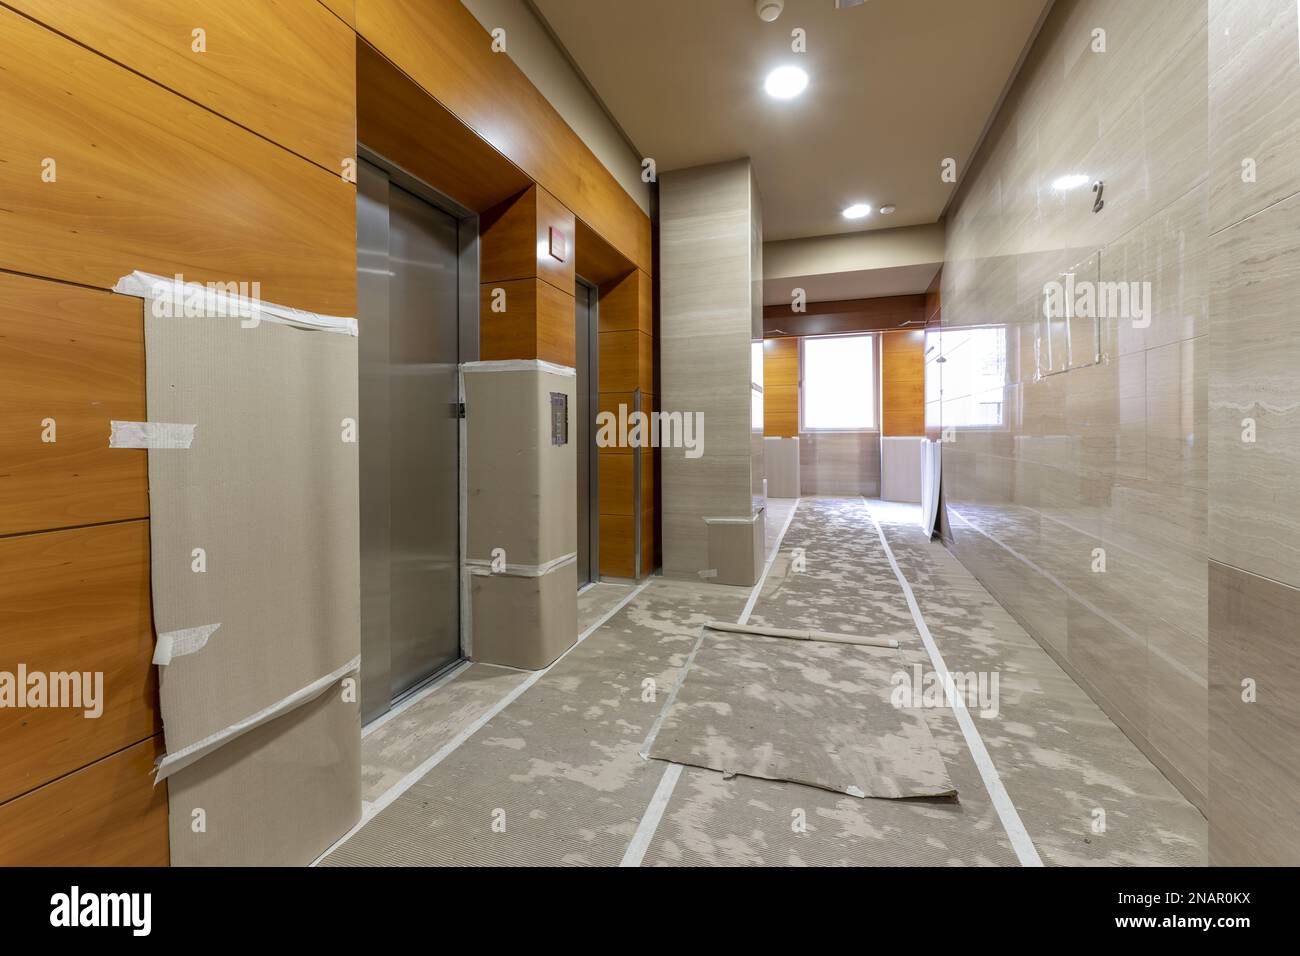 Elevator area of an office building with wooden and marble walls with cardboard-covered floors due to being under renovation Stock Photo